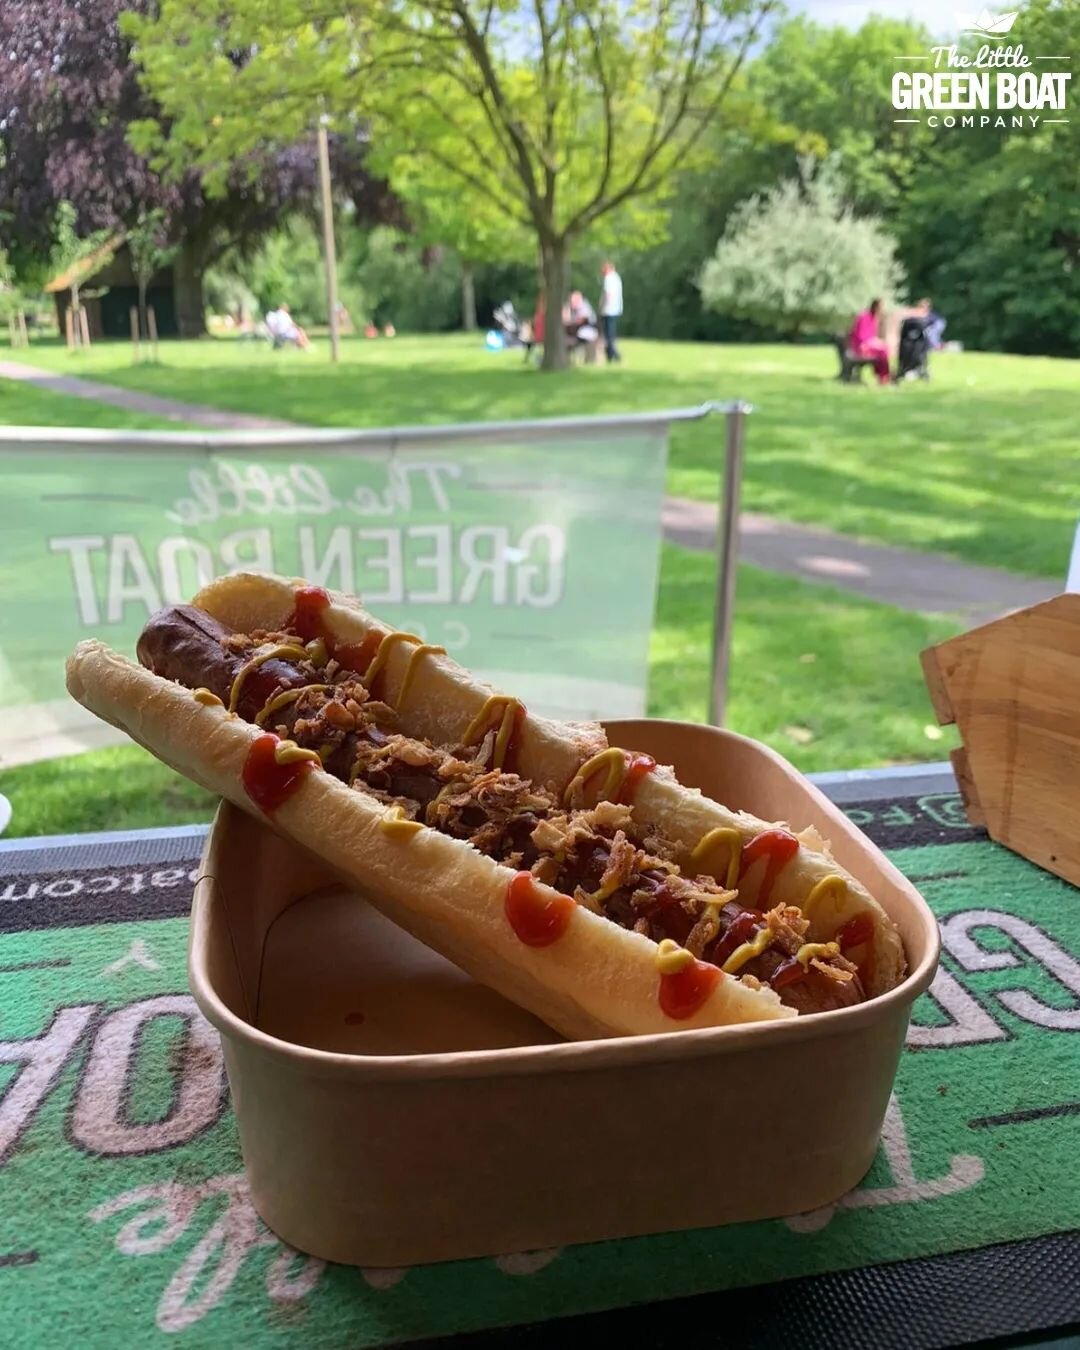 A hotdog loaded with toppings and a hot Waffle with ice cream ... what more could you want 😏

Our cafe in Staines is offering these and even more delicious food and beverages over the weekend!

#cafelondon #surreycafe #surreydaysout #surreydaysoutwi